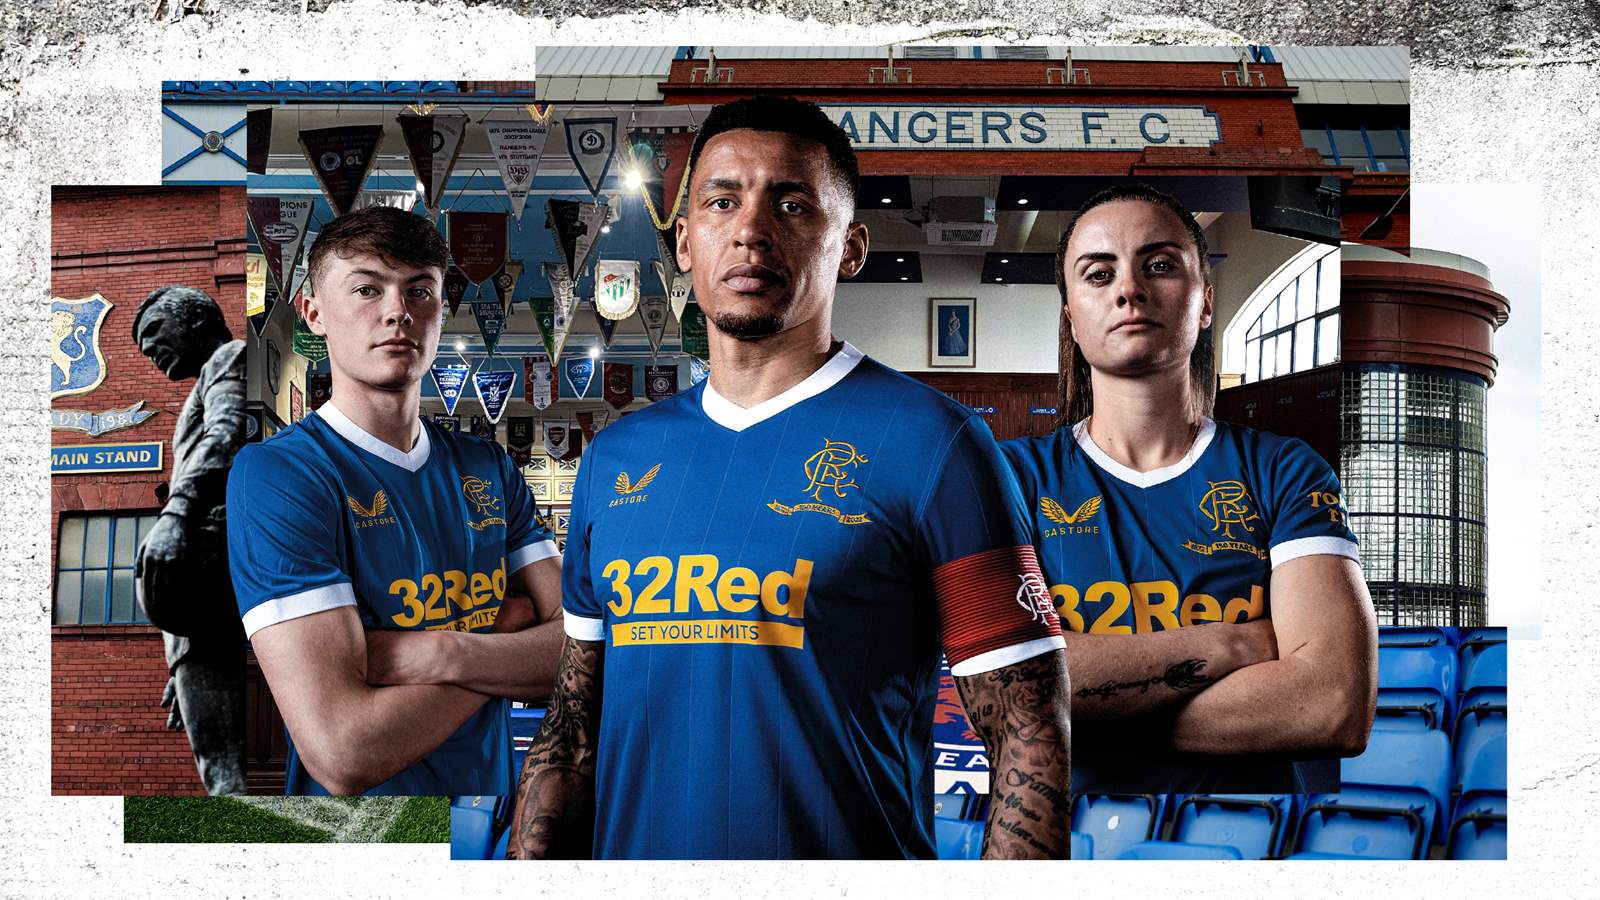 Rangers unveil new home kit designed by Castore for 2020/21 season